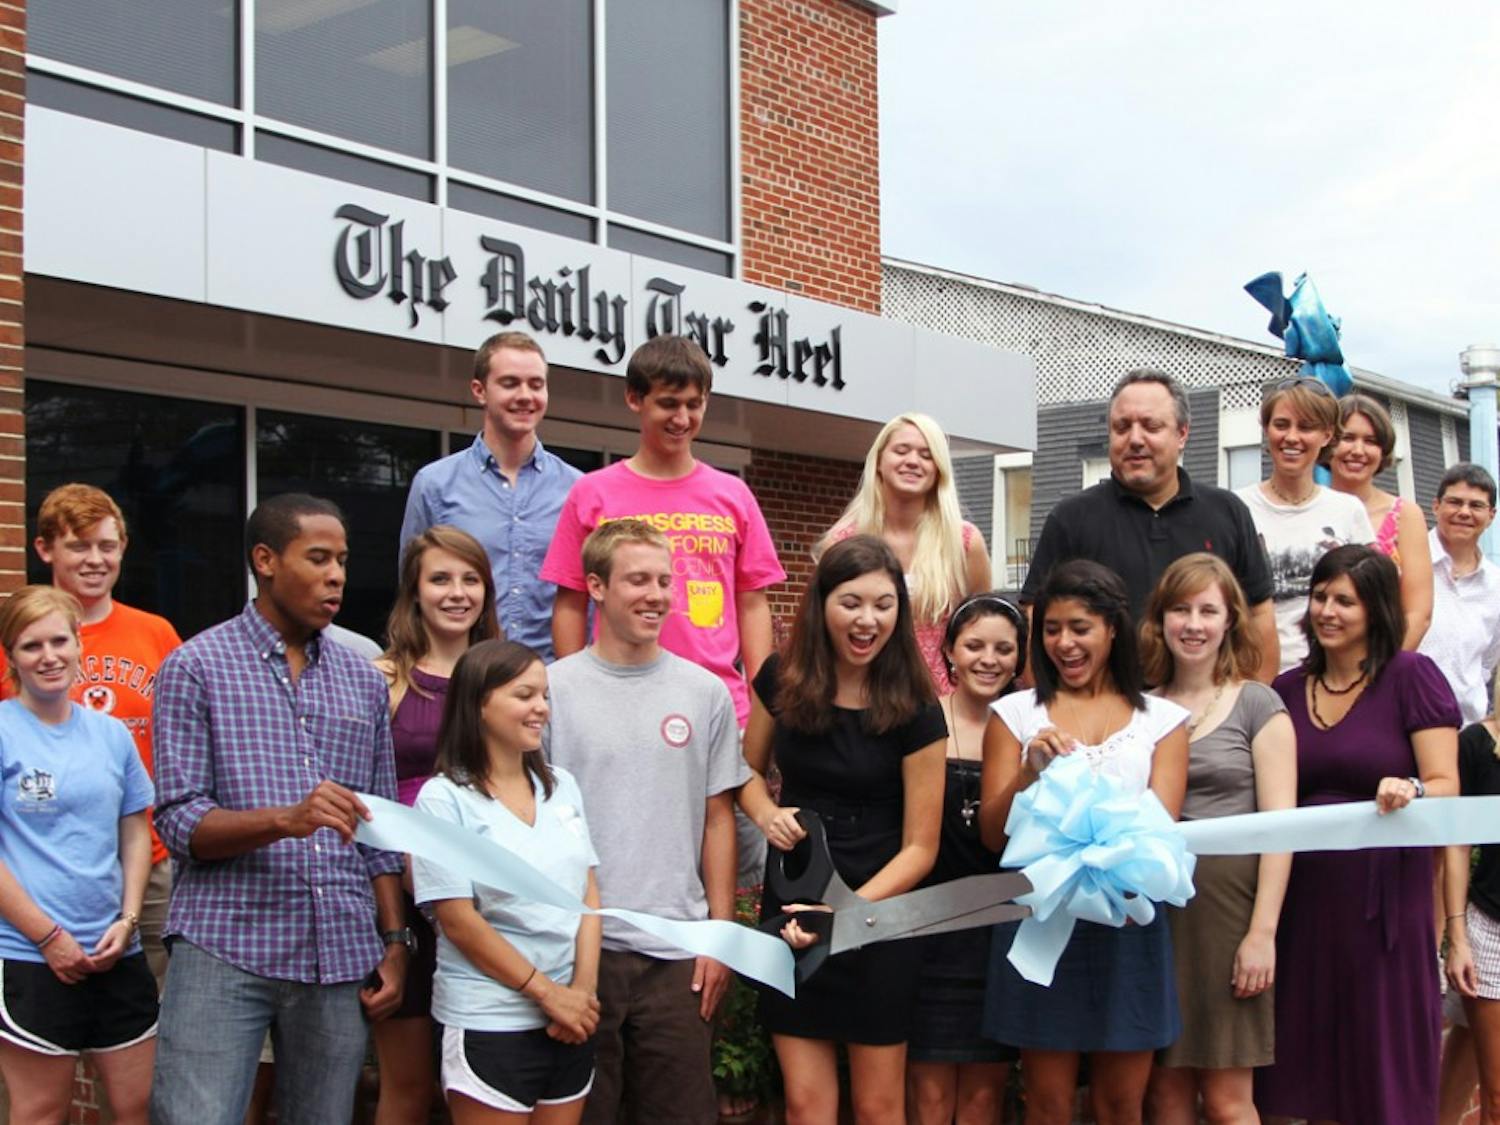 Sarah Frier, editor-in-chief of The Daily Tar Heel, cuts a ribbon to commemorate the newspaper’s new office on East Rosemary Street. The DTH moved in June to its new location from the Frank Porter Graham Student Union.